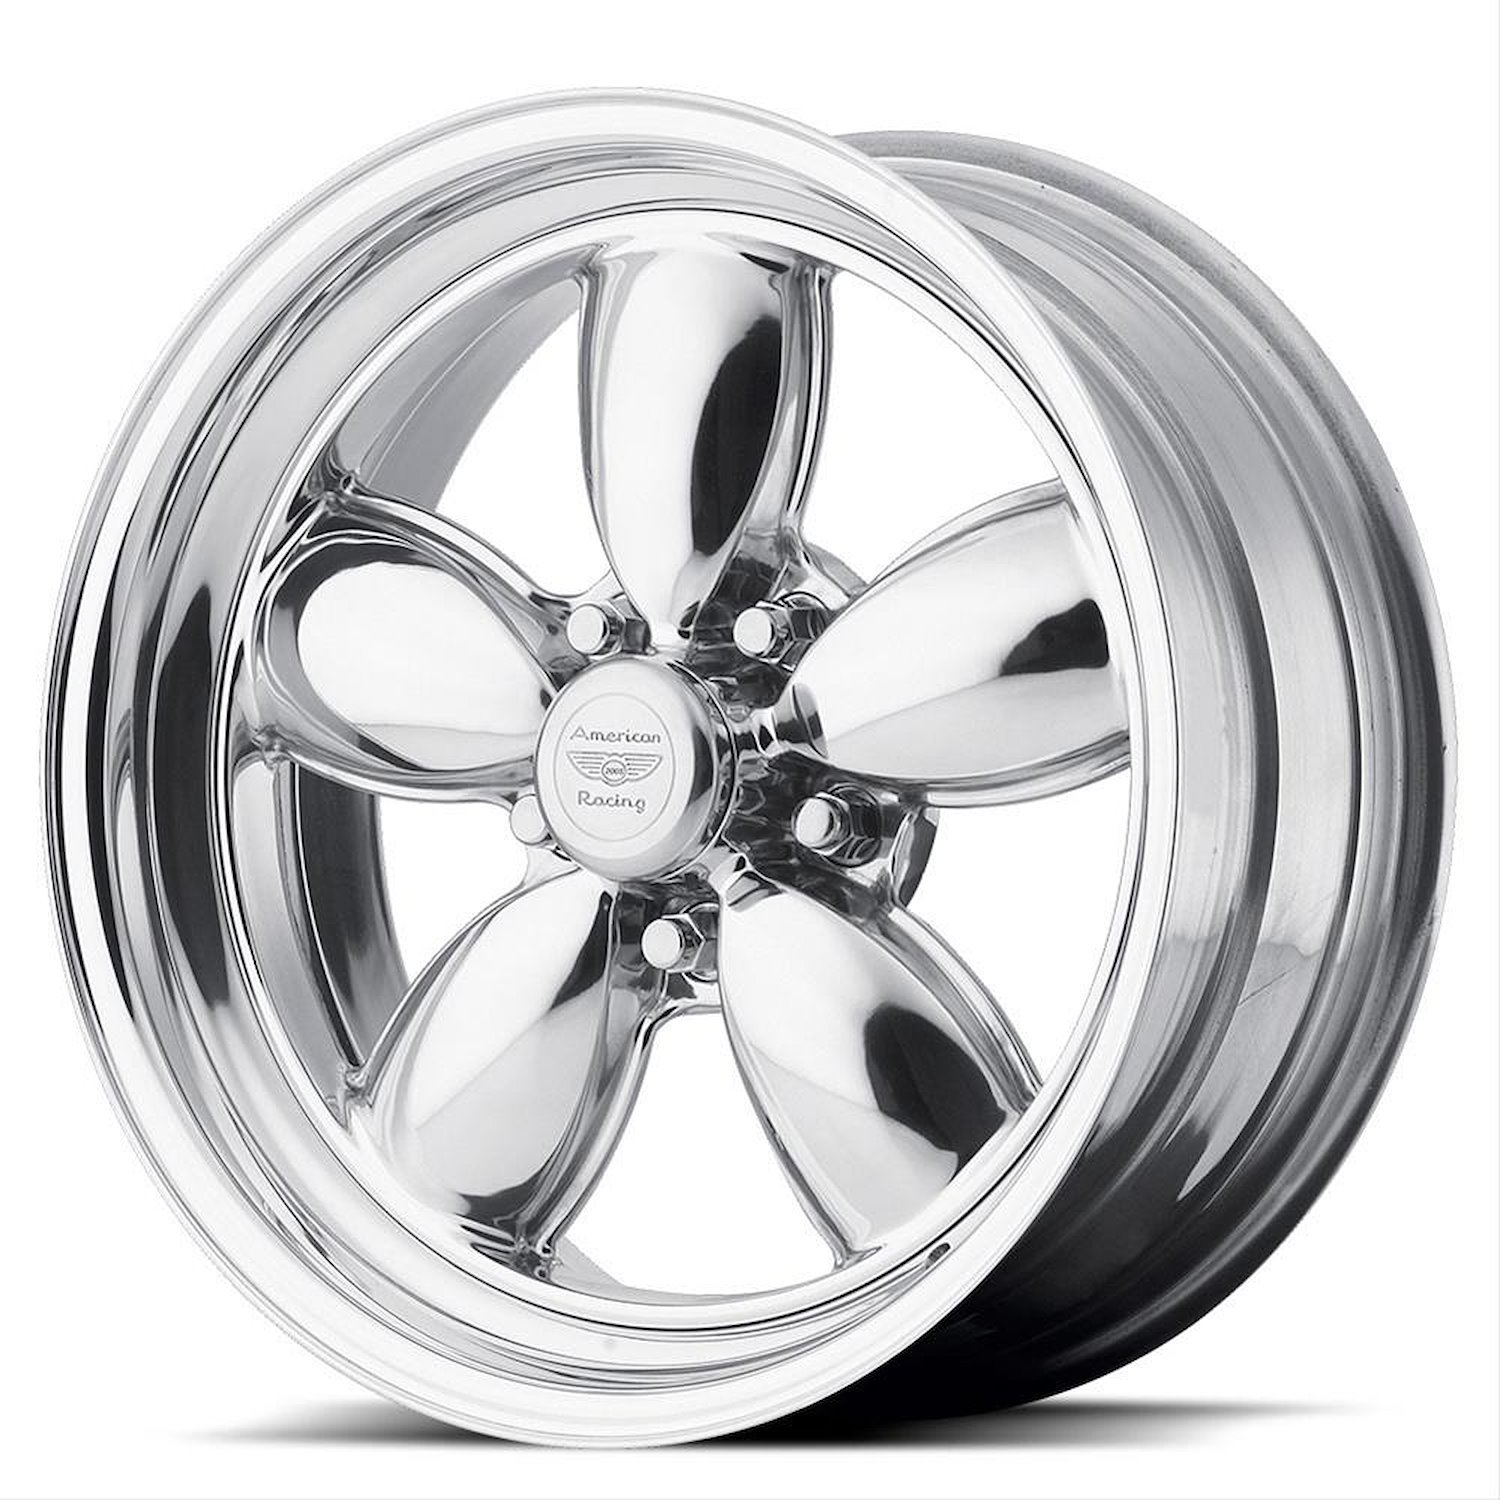 AMERICAN RACING CLASSIC 200S TWO-PIECE POLISHED 15 x 10 5x4.5 -25 4.52